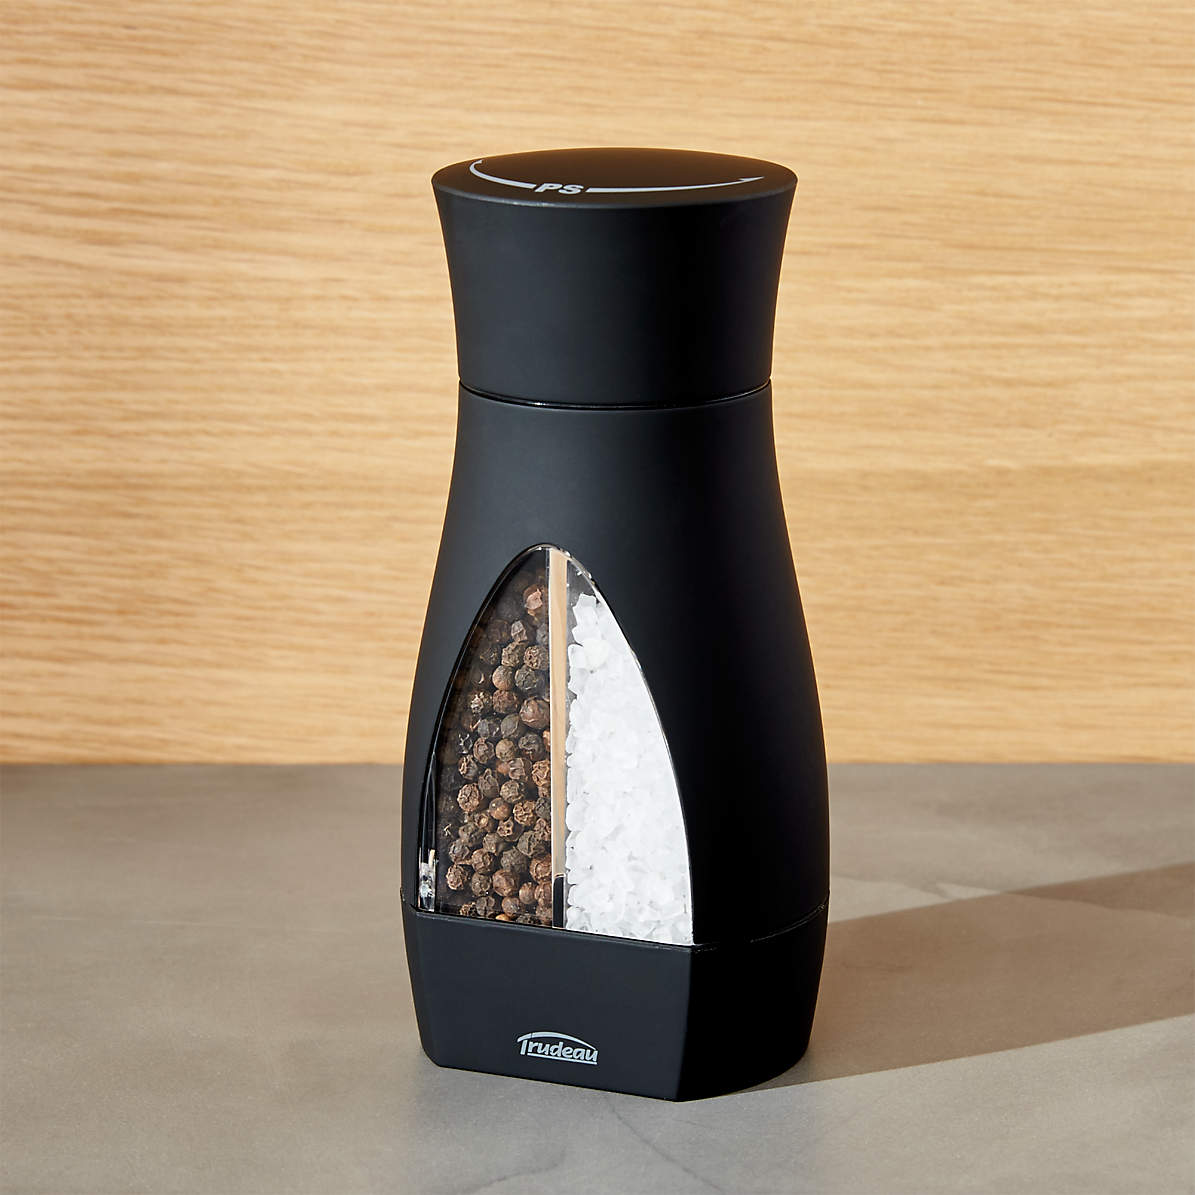 How To Use Salt And Pepper Grinder 